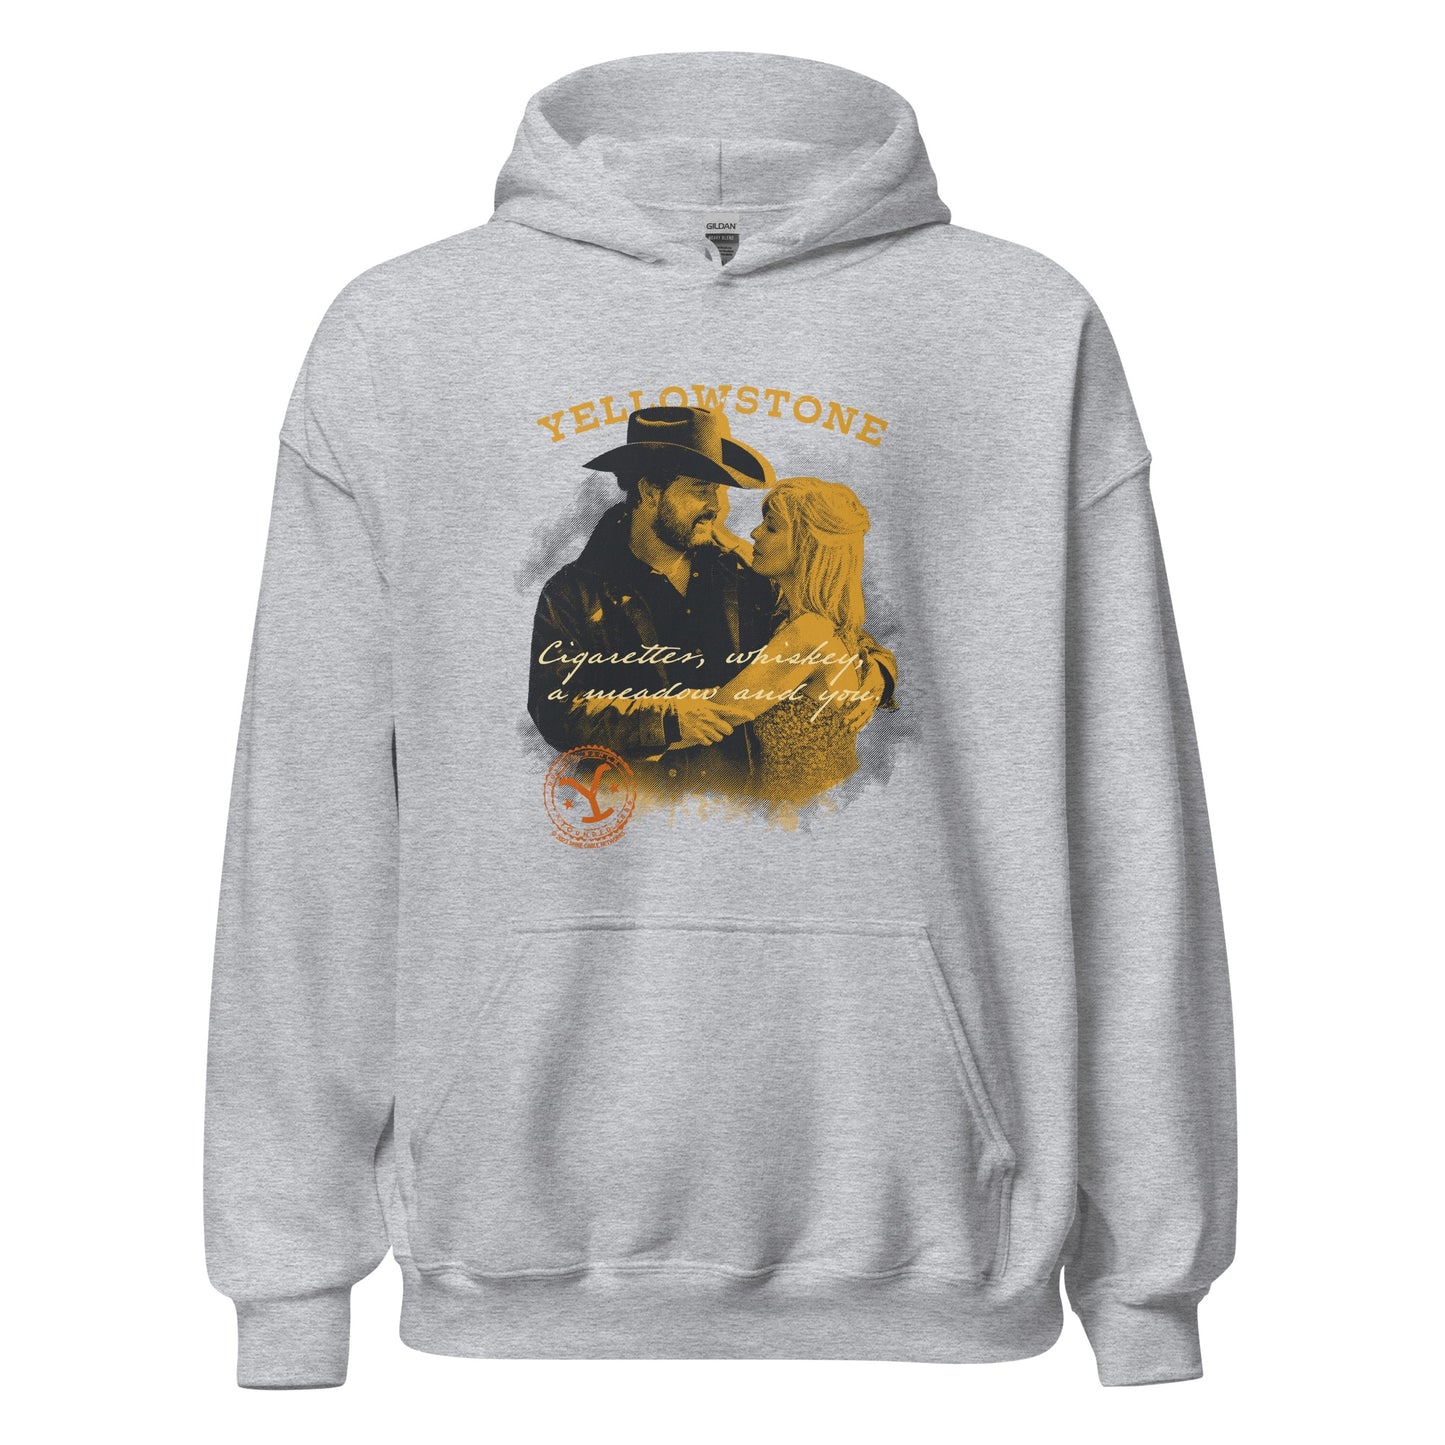 Yellowstone Cigarettes Whiskey and You Hooded Sweatshirt